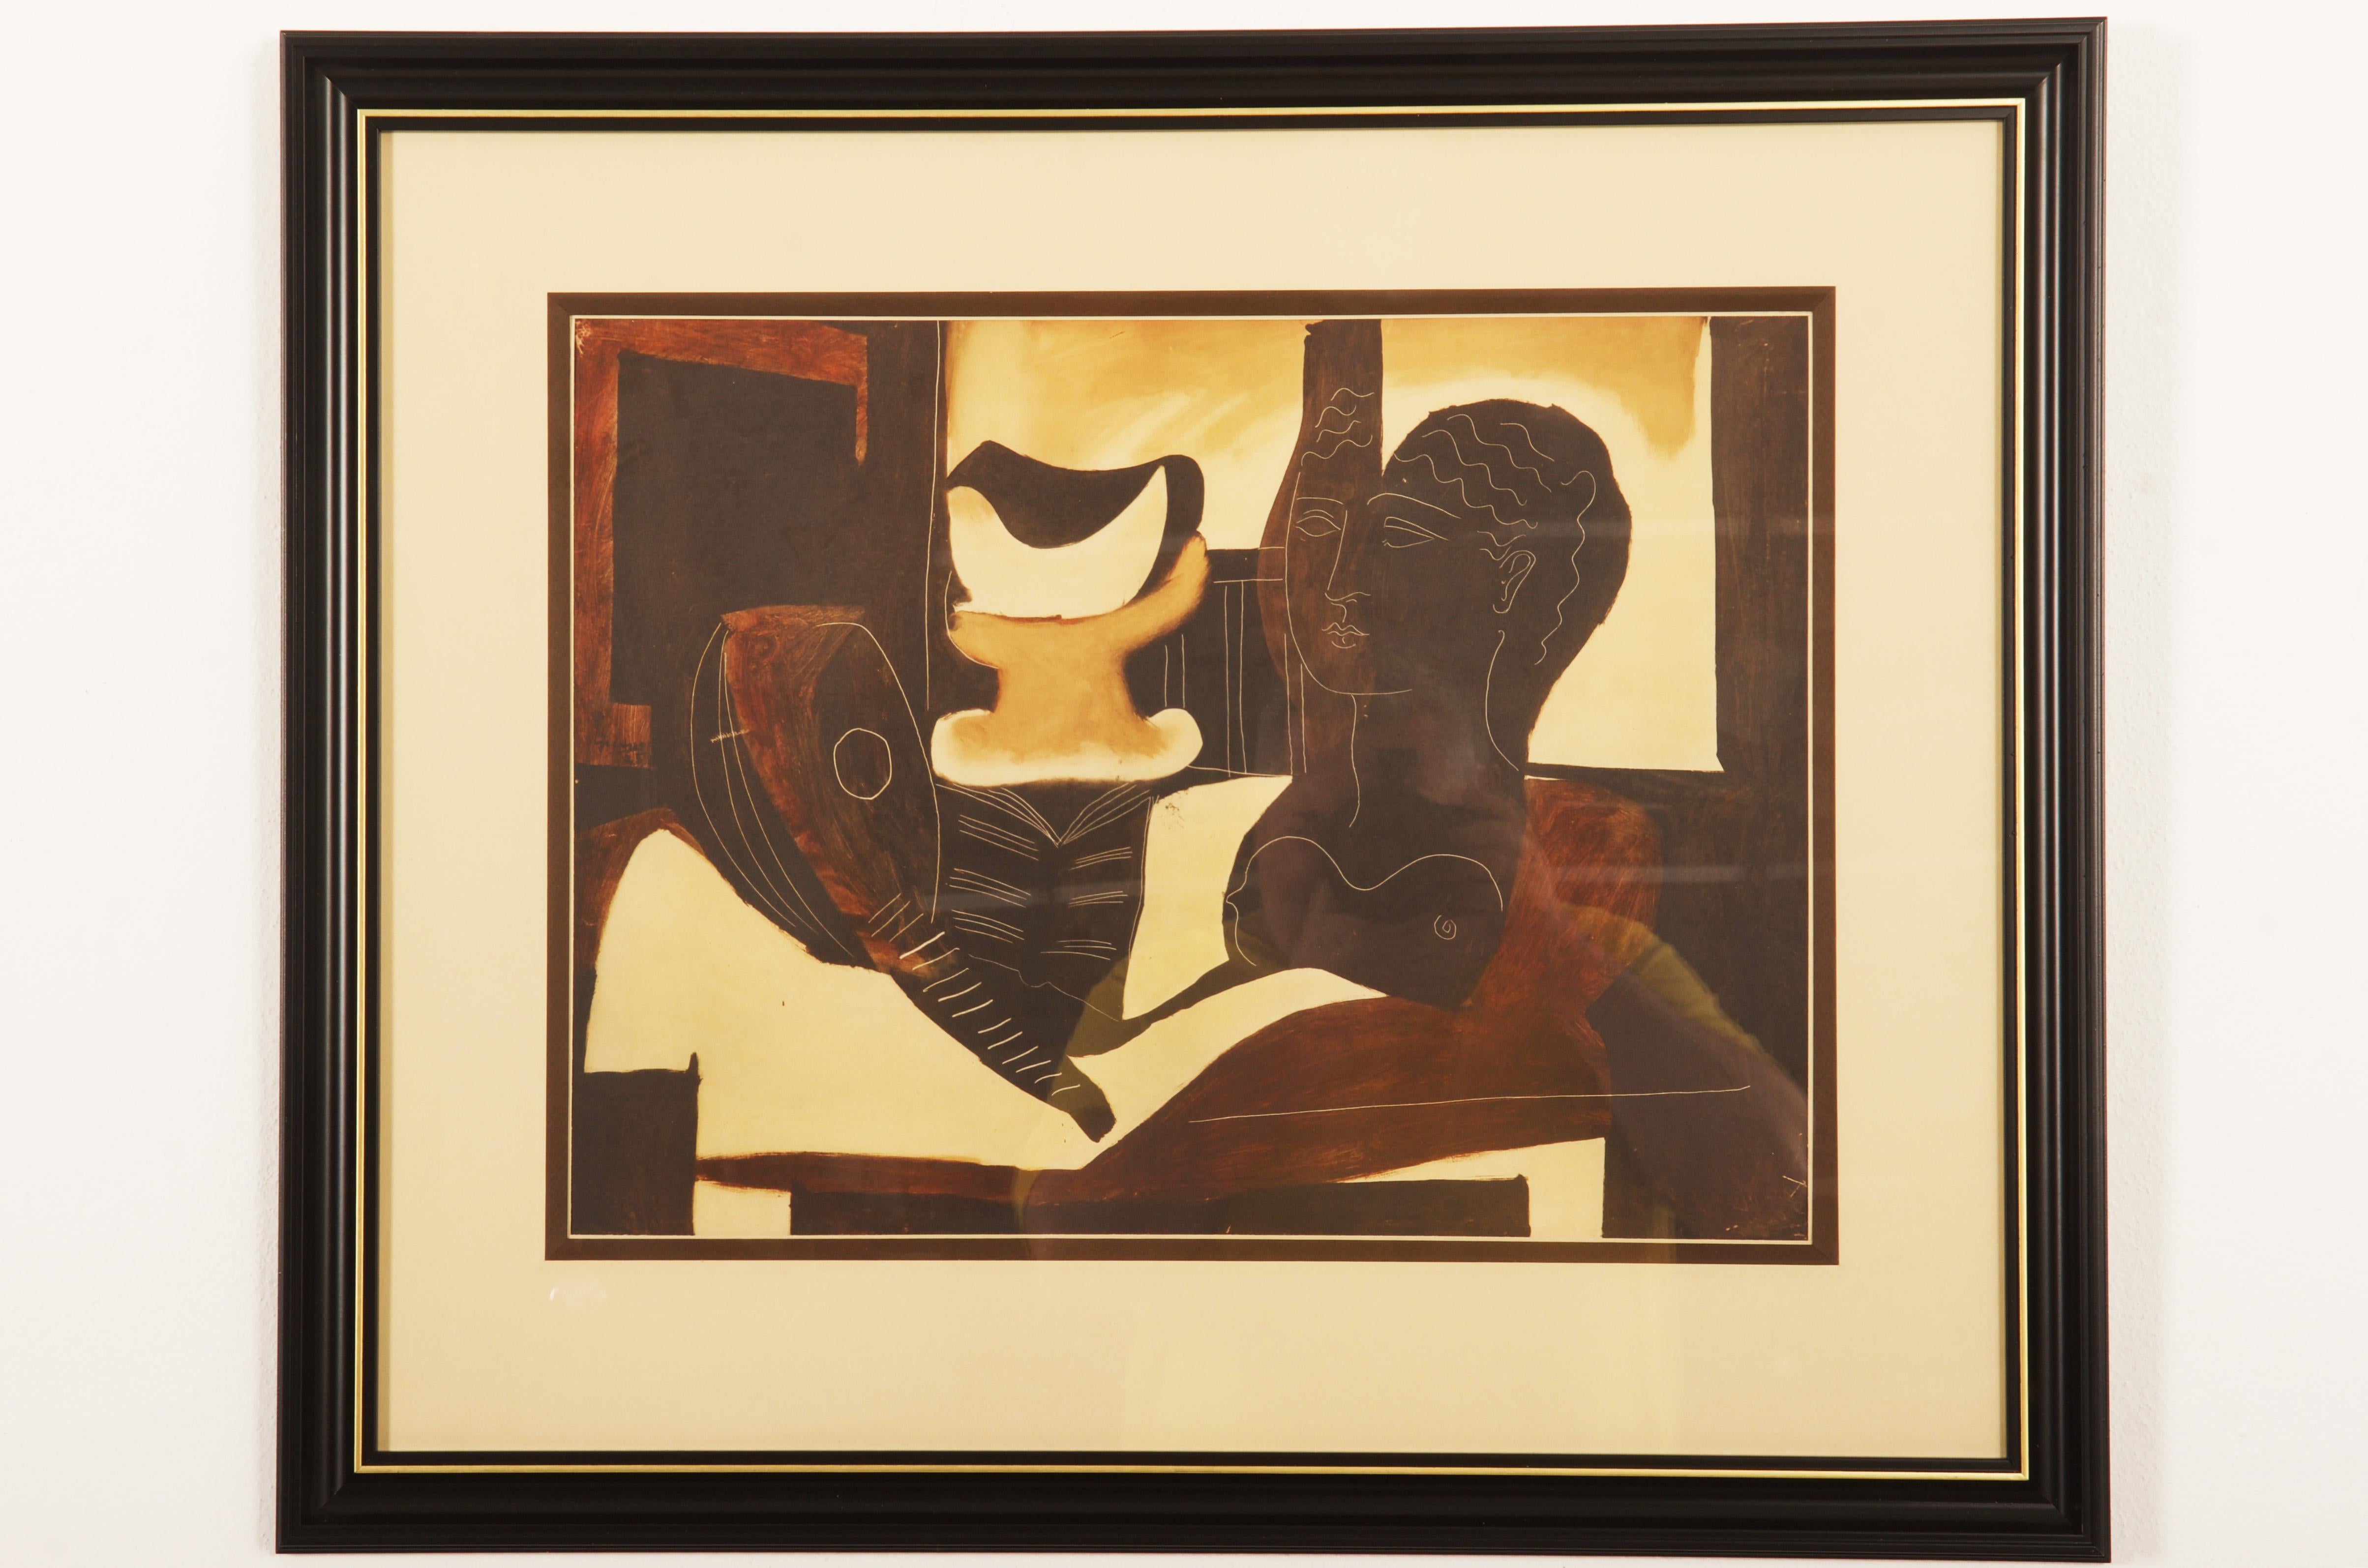 After Pablo Picasso ''Nature Morte a la Tete Antique'' (Still Life with an Antique Head) 1930s Screenprint 52 x 40cm Sheet. Done after a painting executed in 1925 and published by Max Jeffe Wien. Framed 62'x73cm. Publisher: S.P.A.D.E.M., Paris,